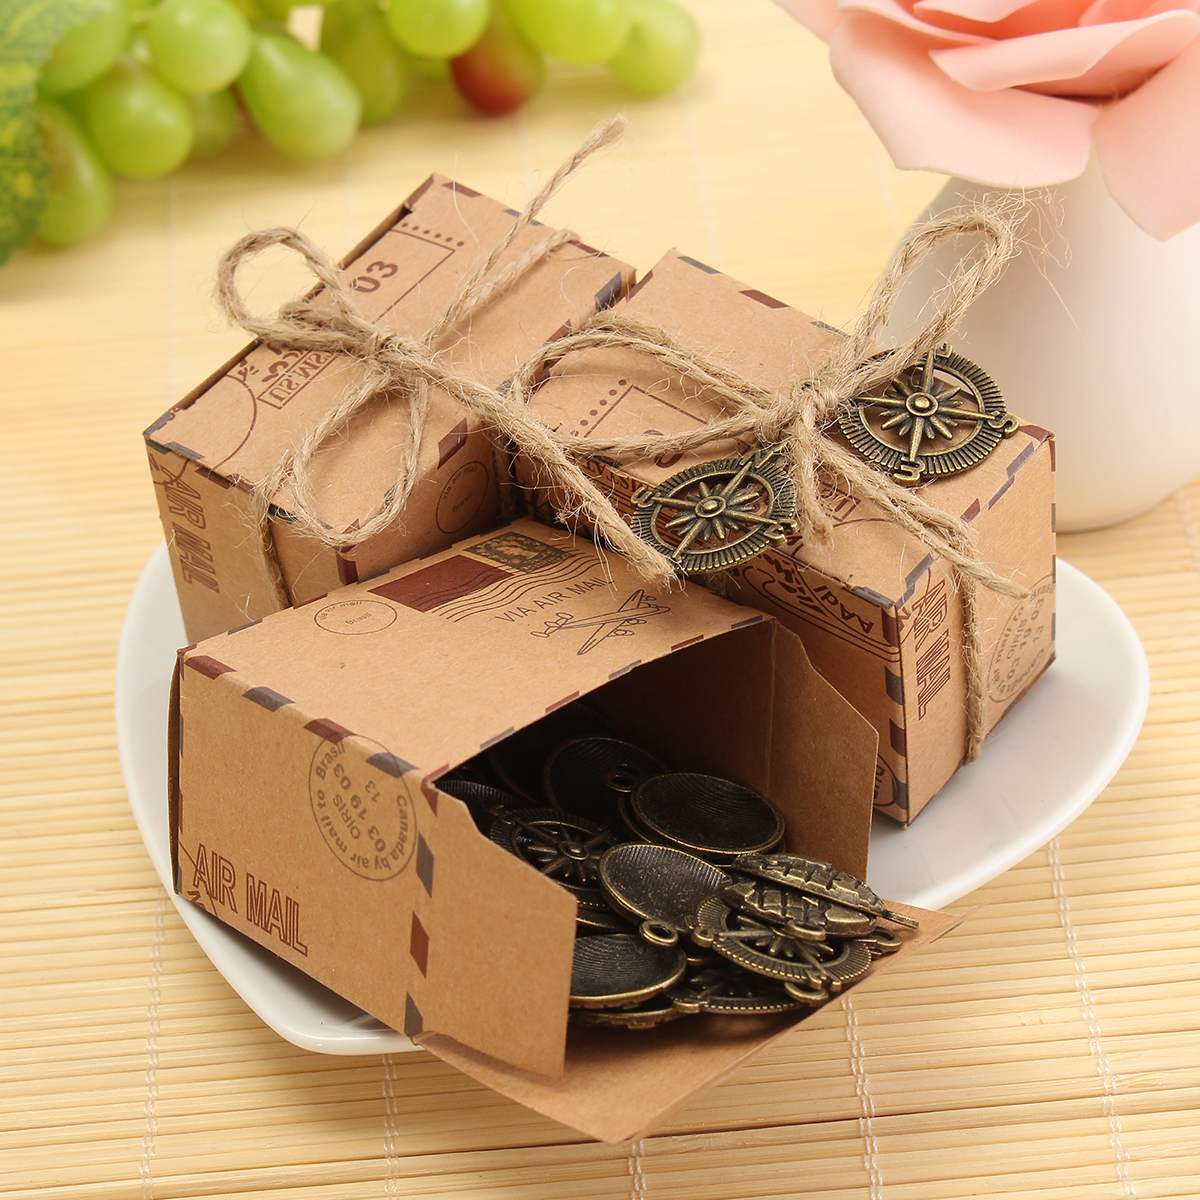 50pcs-Kraft-Paper-Box-Airplane-Mail-Candy-Box-Rustic-Wedding-Favors-Shabby-Vintage-Gift-Packing-Bags-1110199